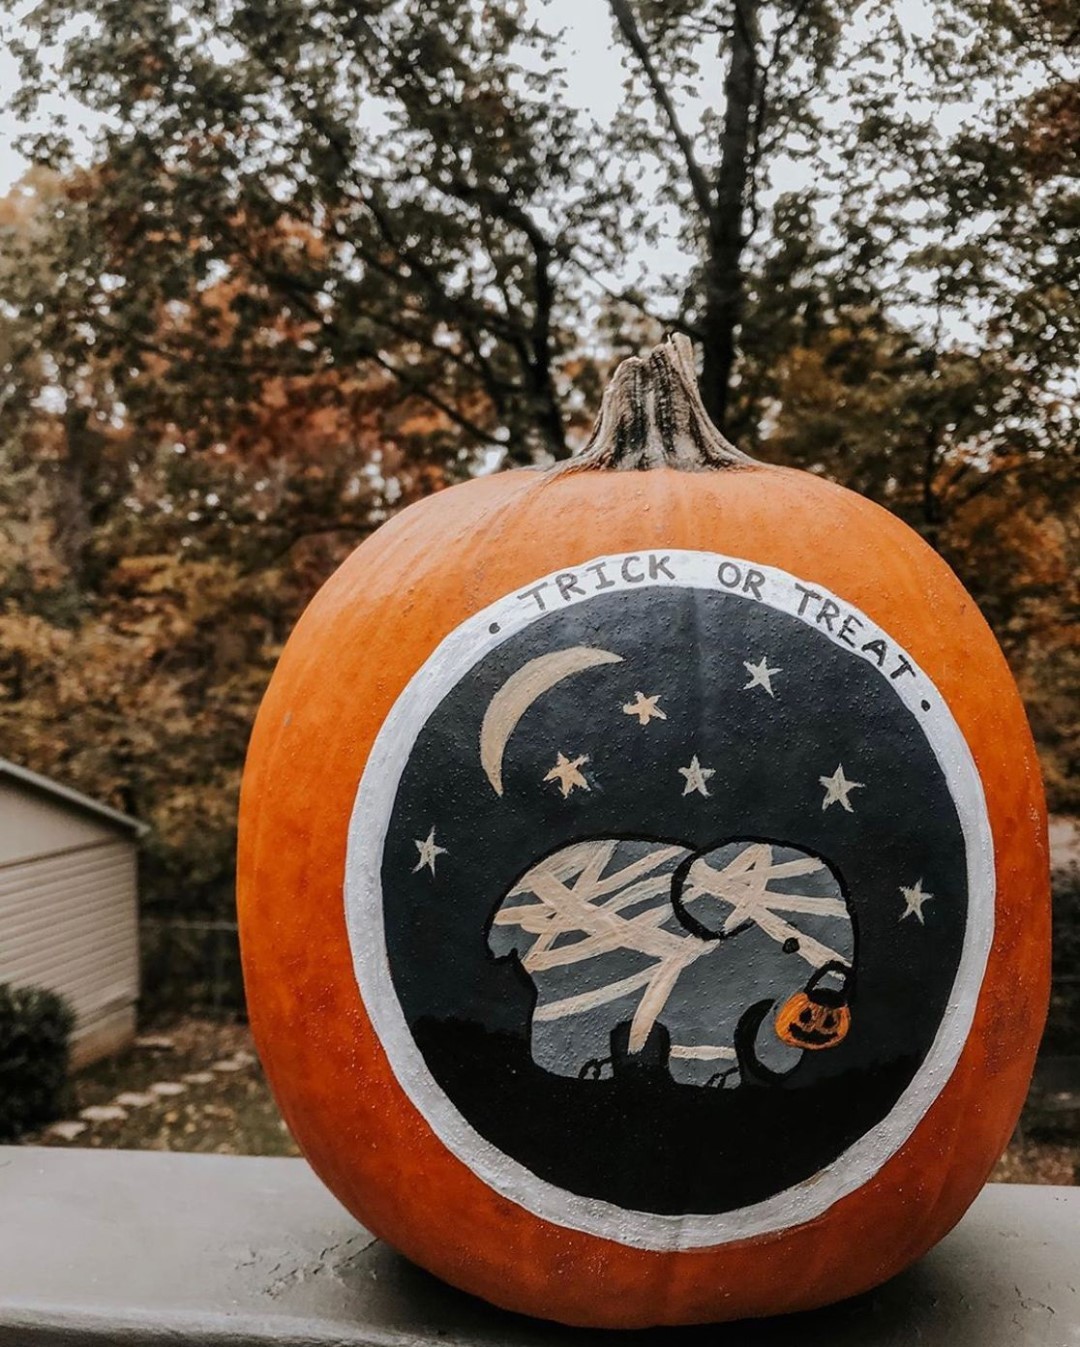 Ivory Ella - Get your pumpkins ready... The #IvoryEllaPumpkin contest is BACK - this year with a starry twist 🌙 ⭐️ We are officially accepting submissions TOMORROW for this year's most creative pumpki...